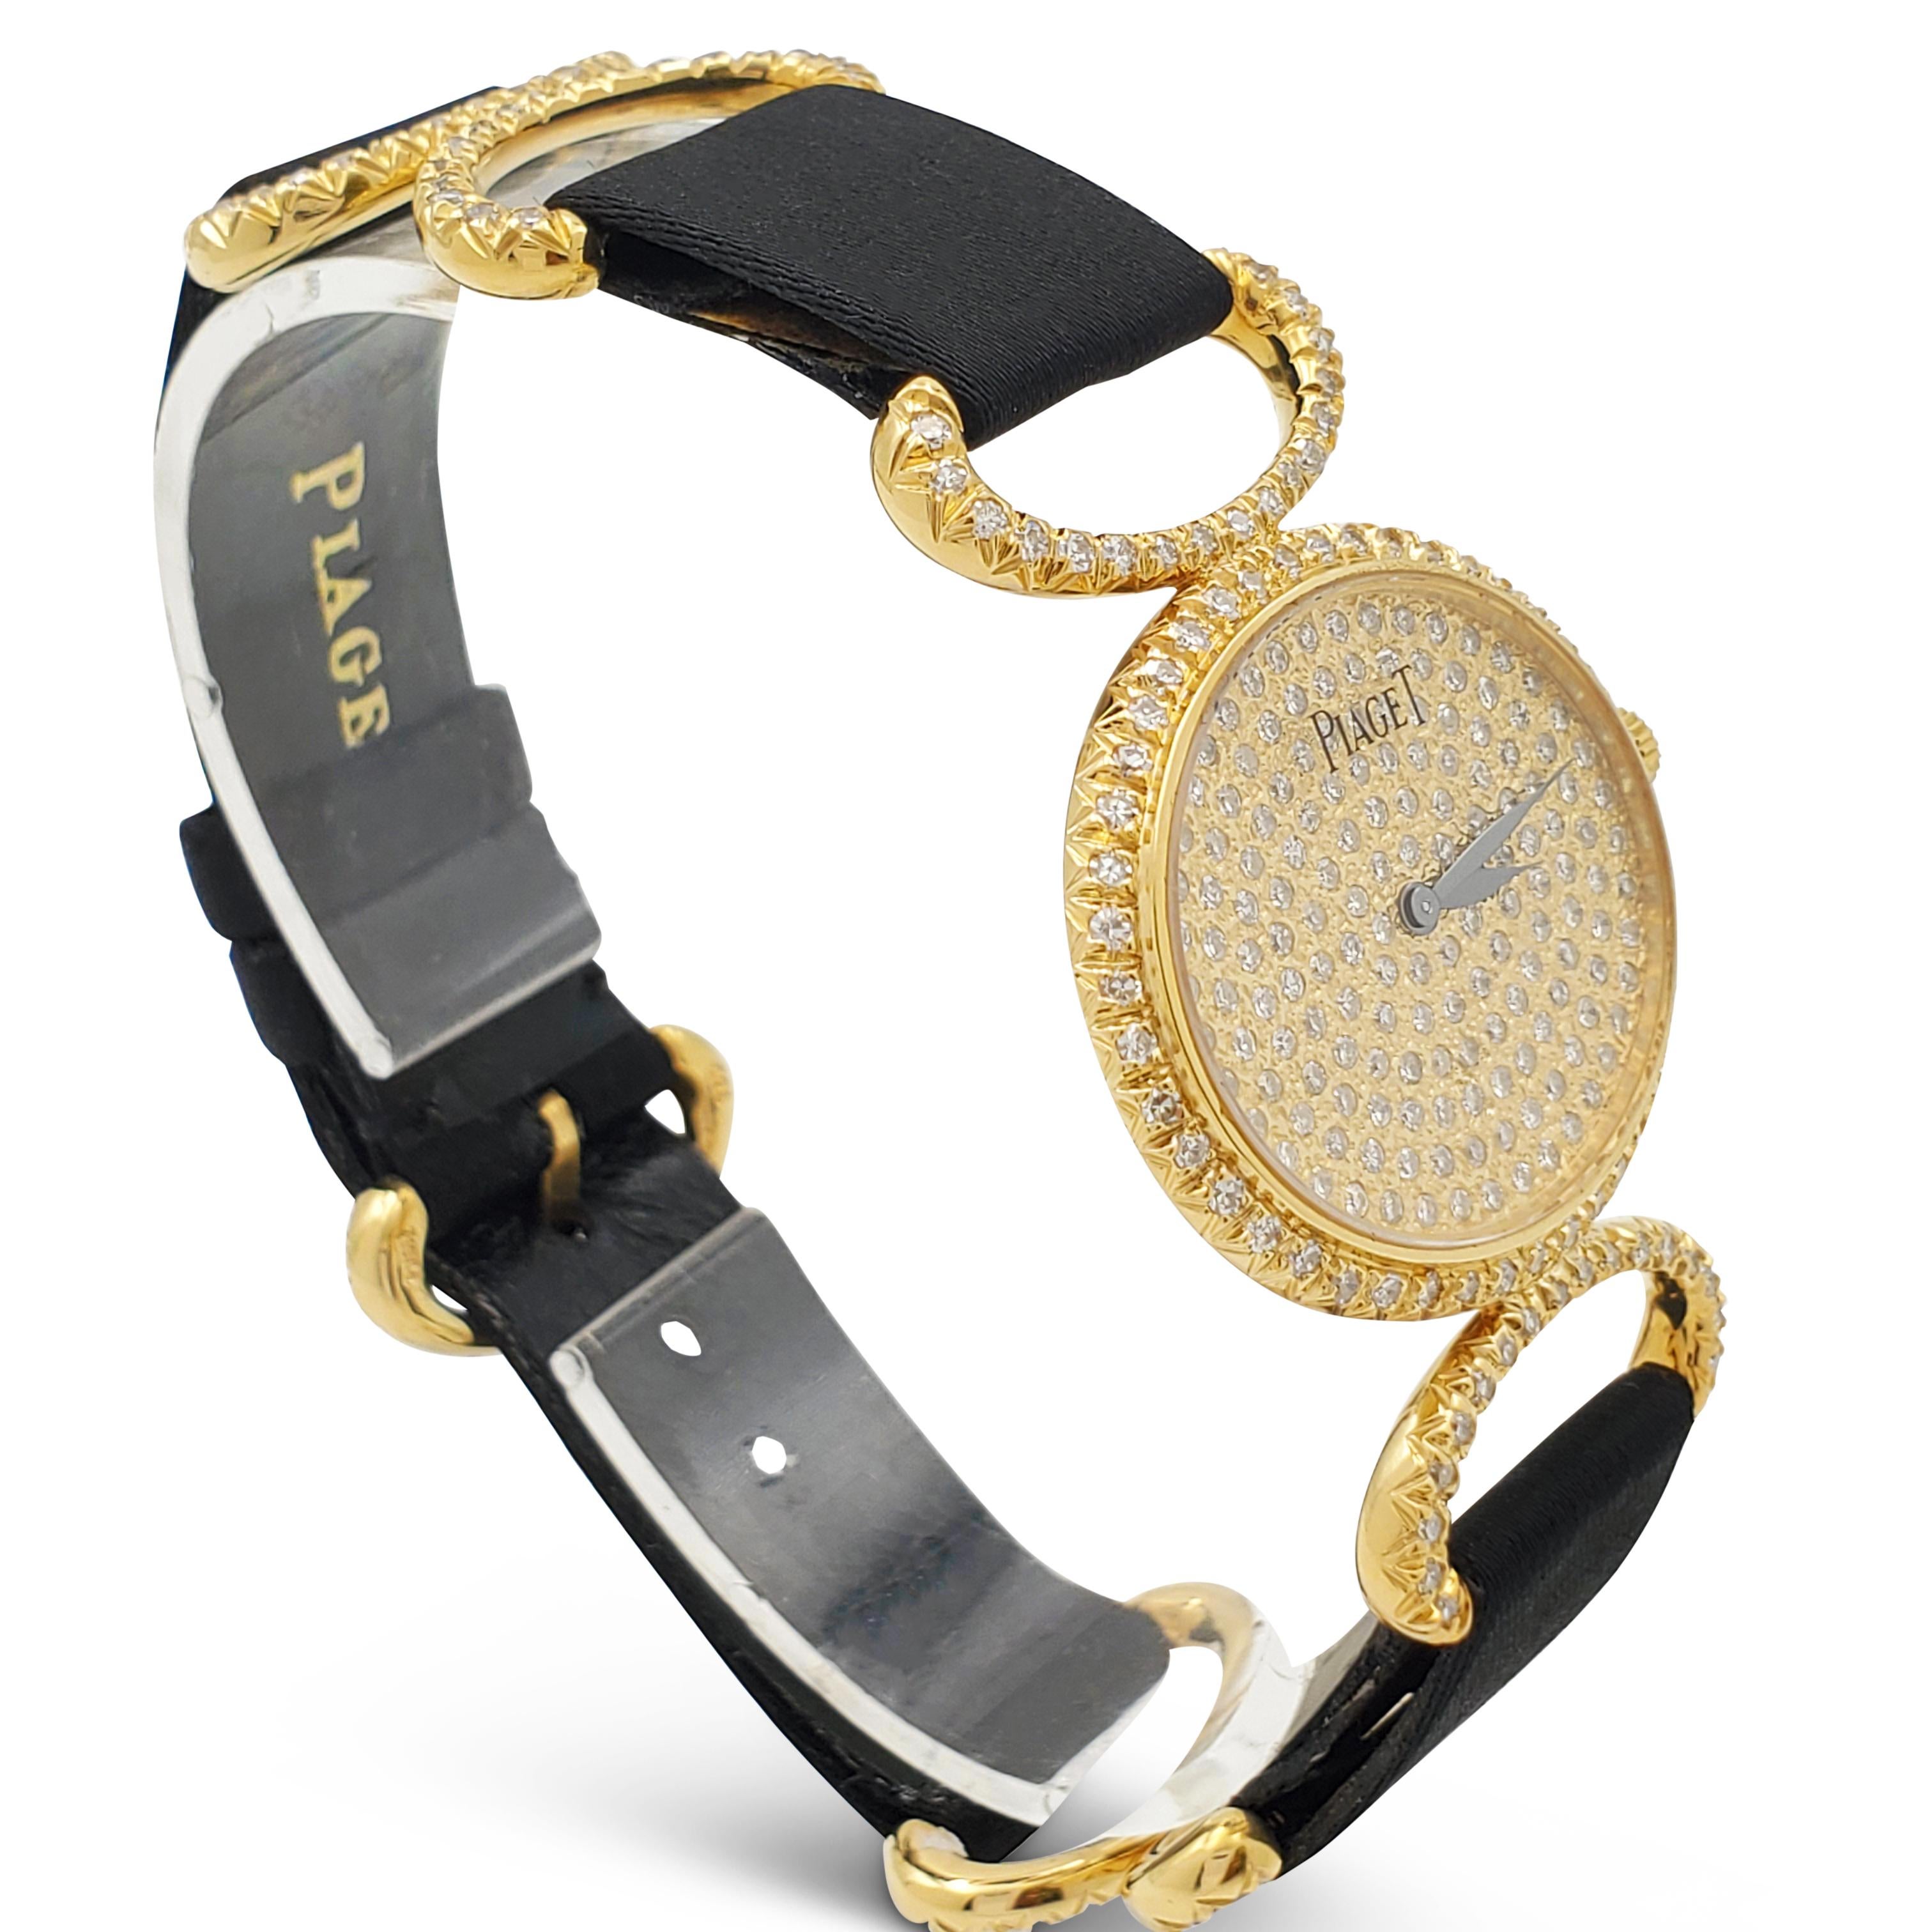 Authentic Piaget ladies watch ref 9802 crafted in 18 karat yellow gold featuring a diamond-set dial, bezel, and strap.  27 mm yellow gold case, mechanical (manual) movement, black nylon and leather strap.  Will fit up to a 6 3/4 inch wrist.  Watch